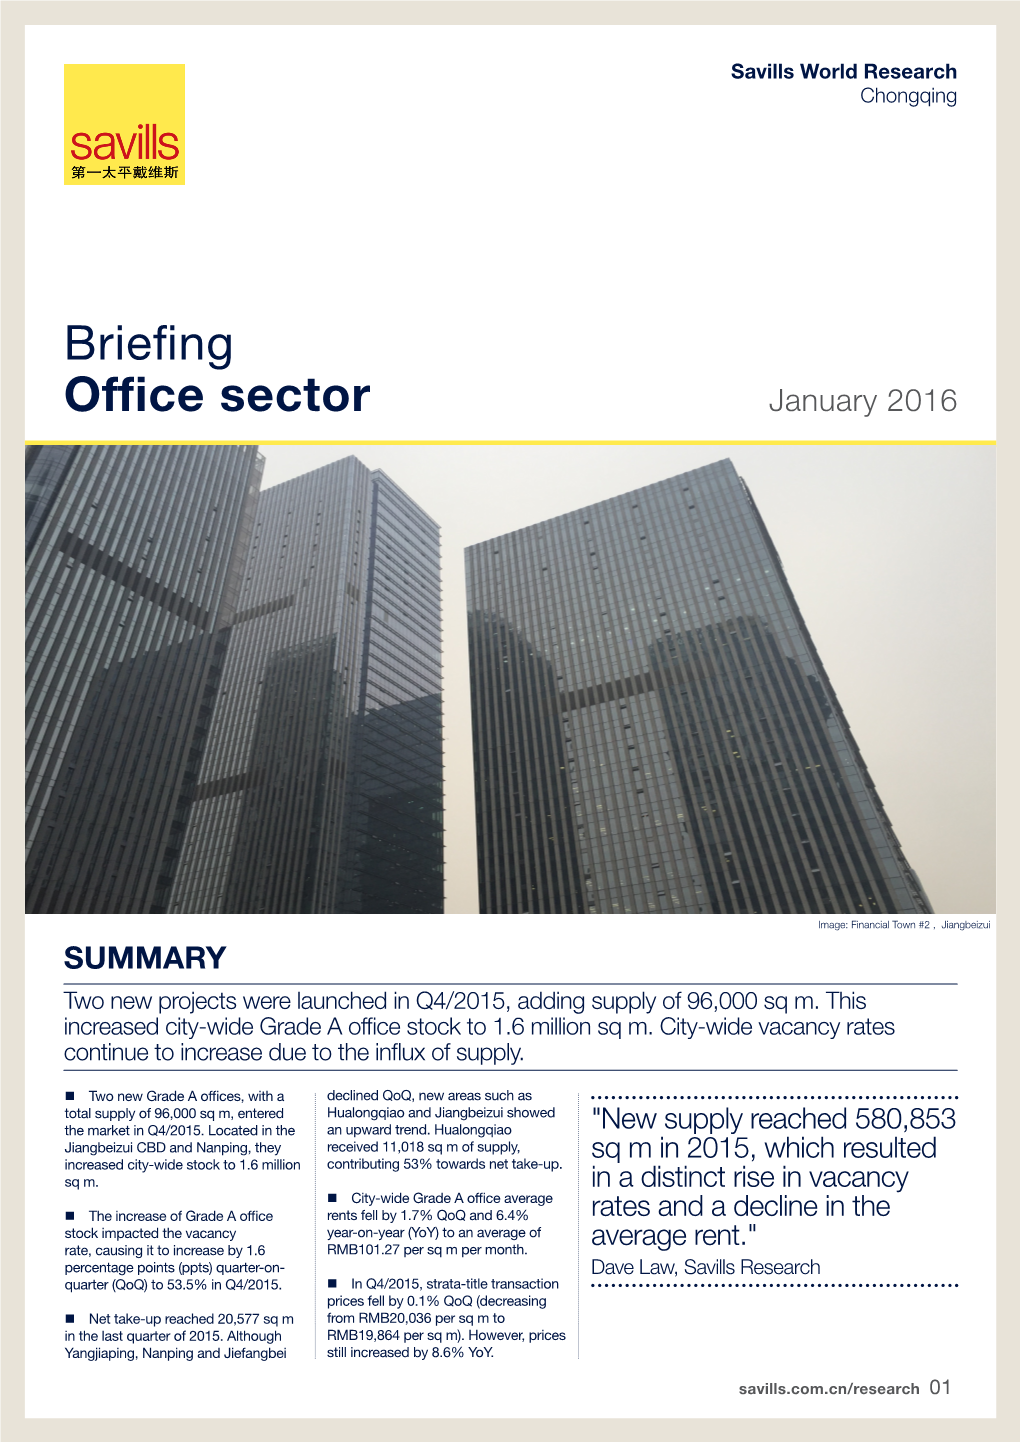 Briefing Office Sector January 2016